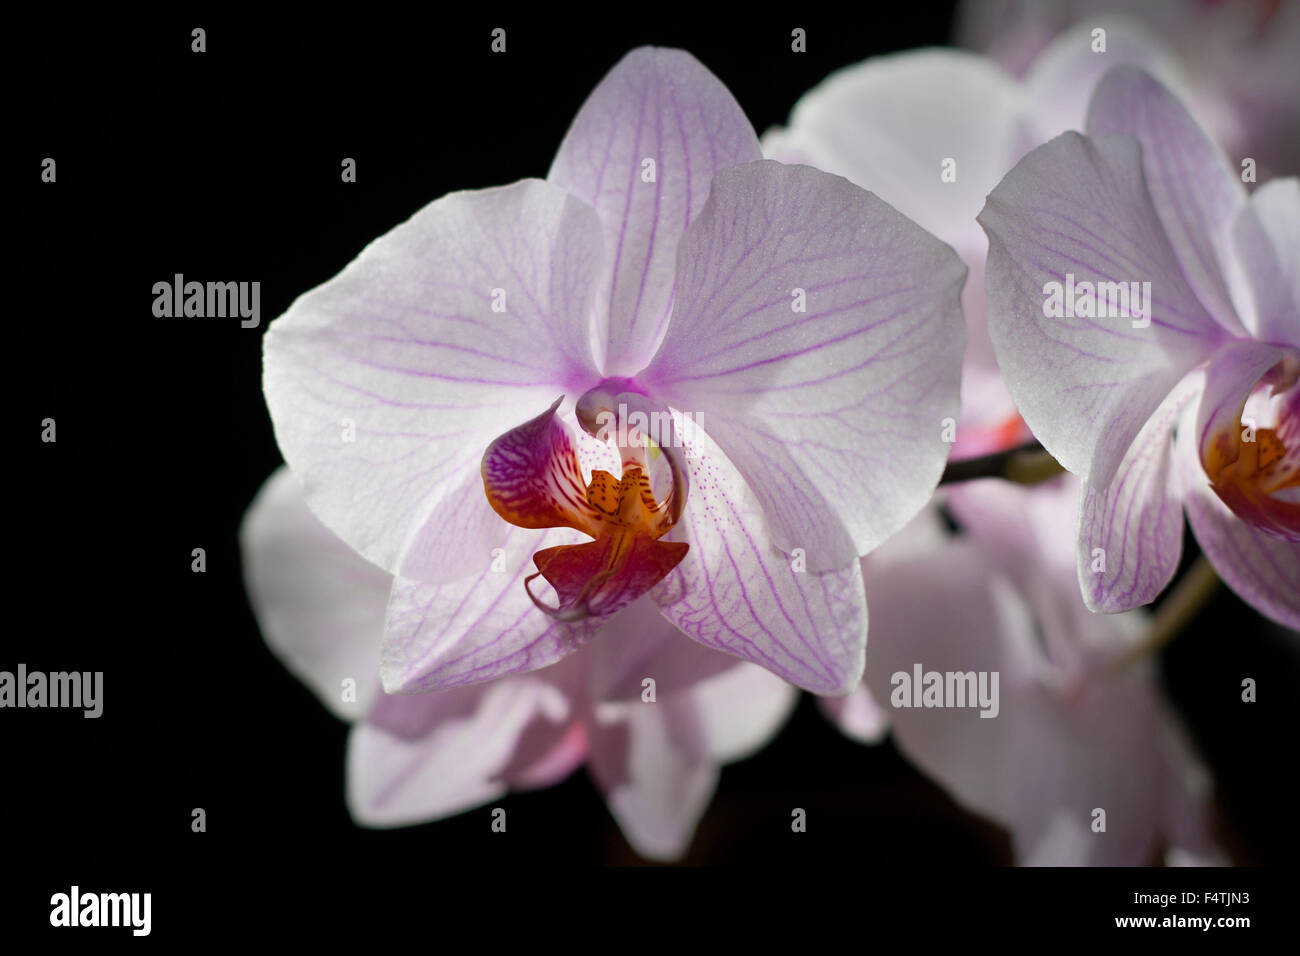 White and violet orchid flower on black background Stock Photo